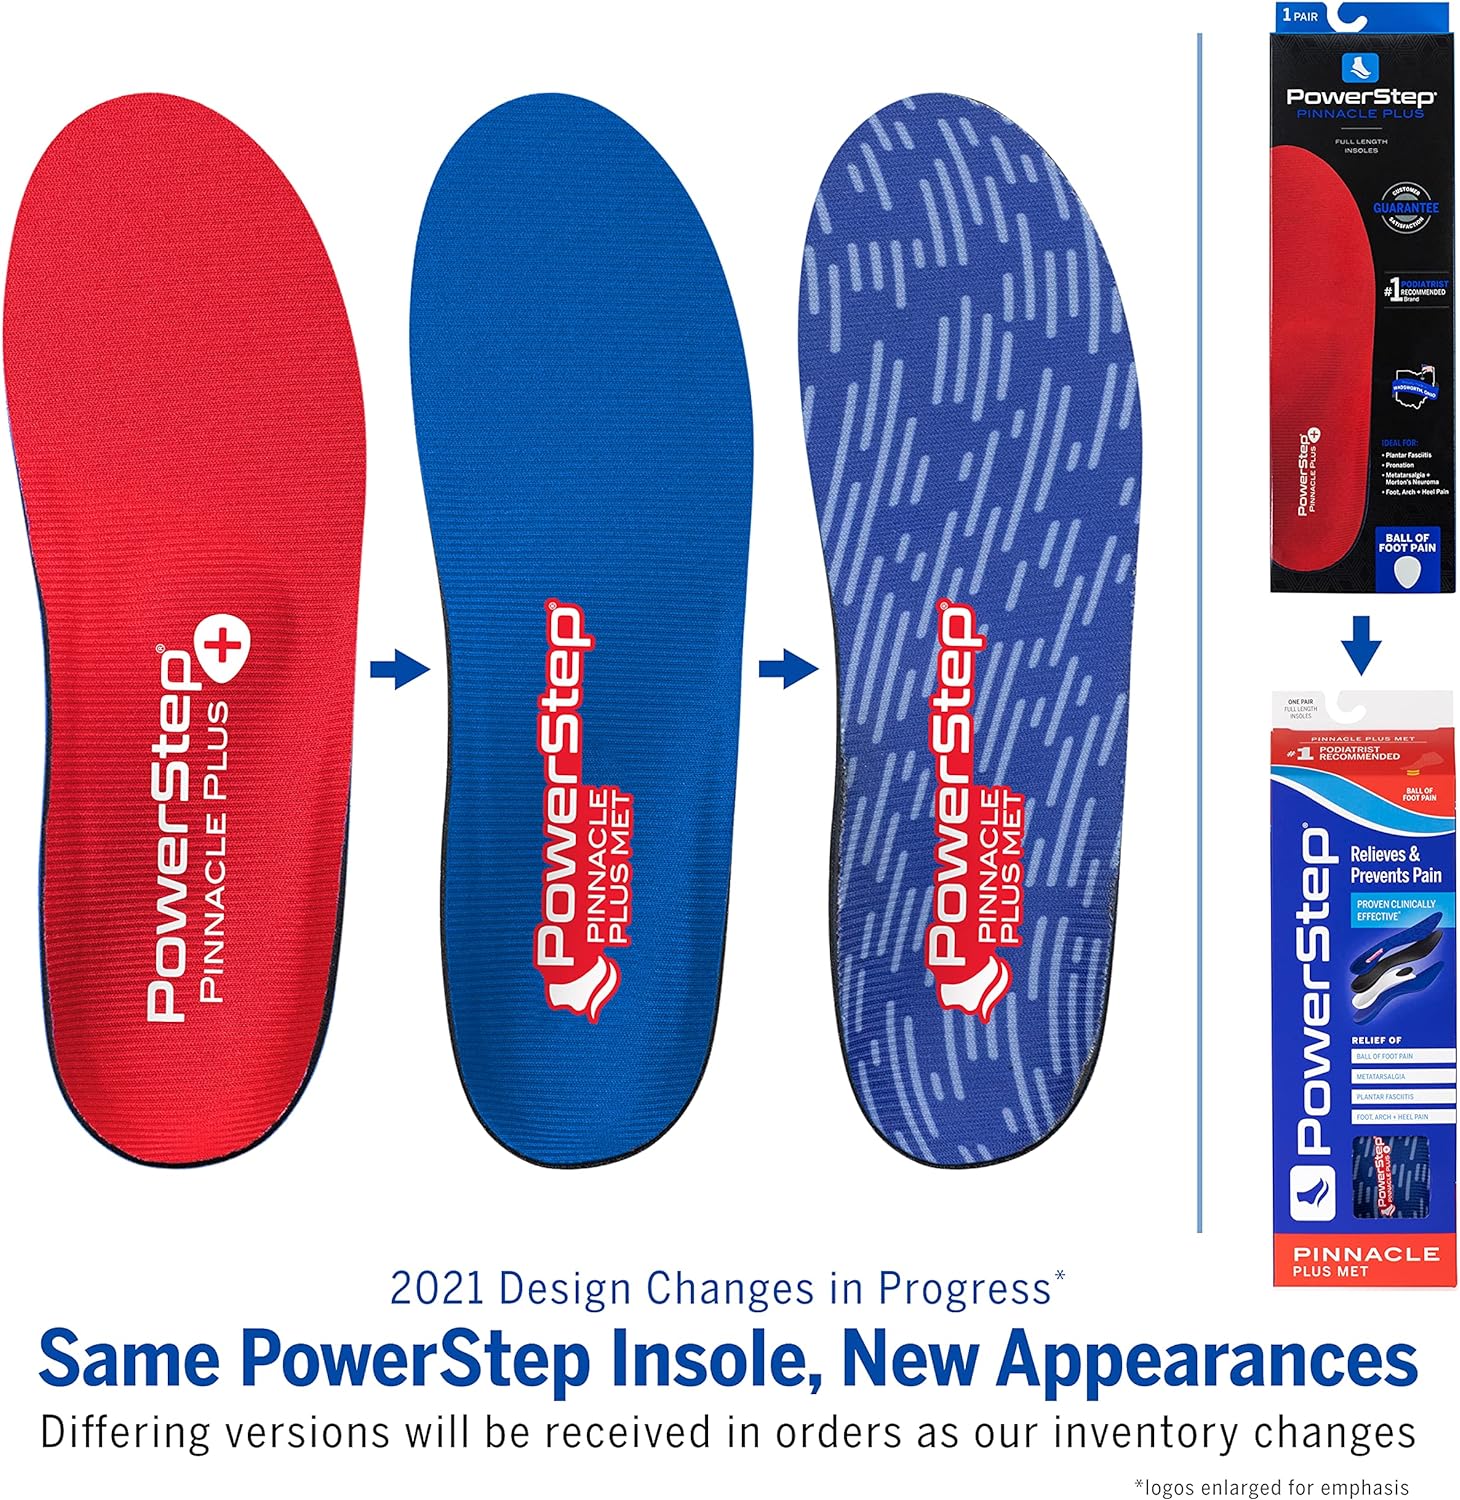 Powerstep Pinnacle Plus Ball of Foot Pain Relief Orthotics - Shoe Inserts for Metatarsalgia, Arch Support, and Mortons Neuroma Pain Relief - Shoe Insoles with Metatarsal Pad (M 5-5.5, F 7-7.5).